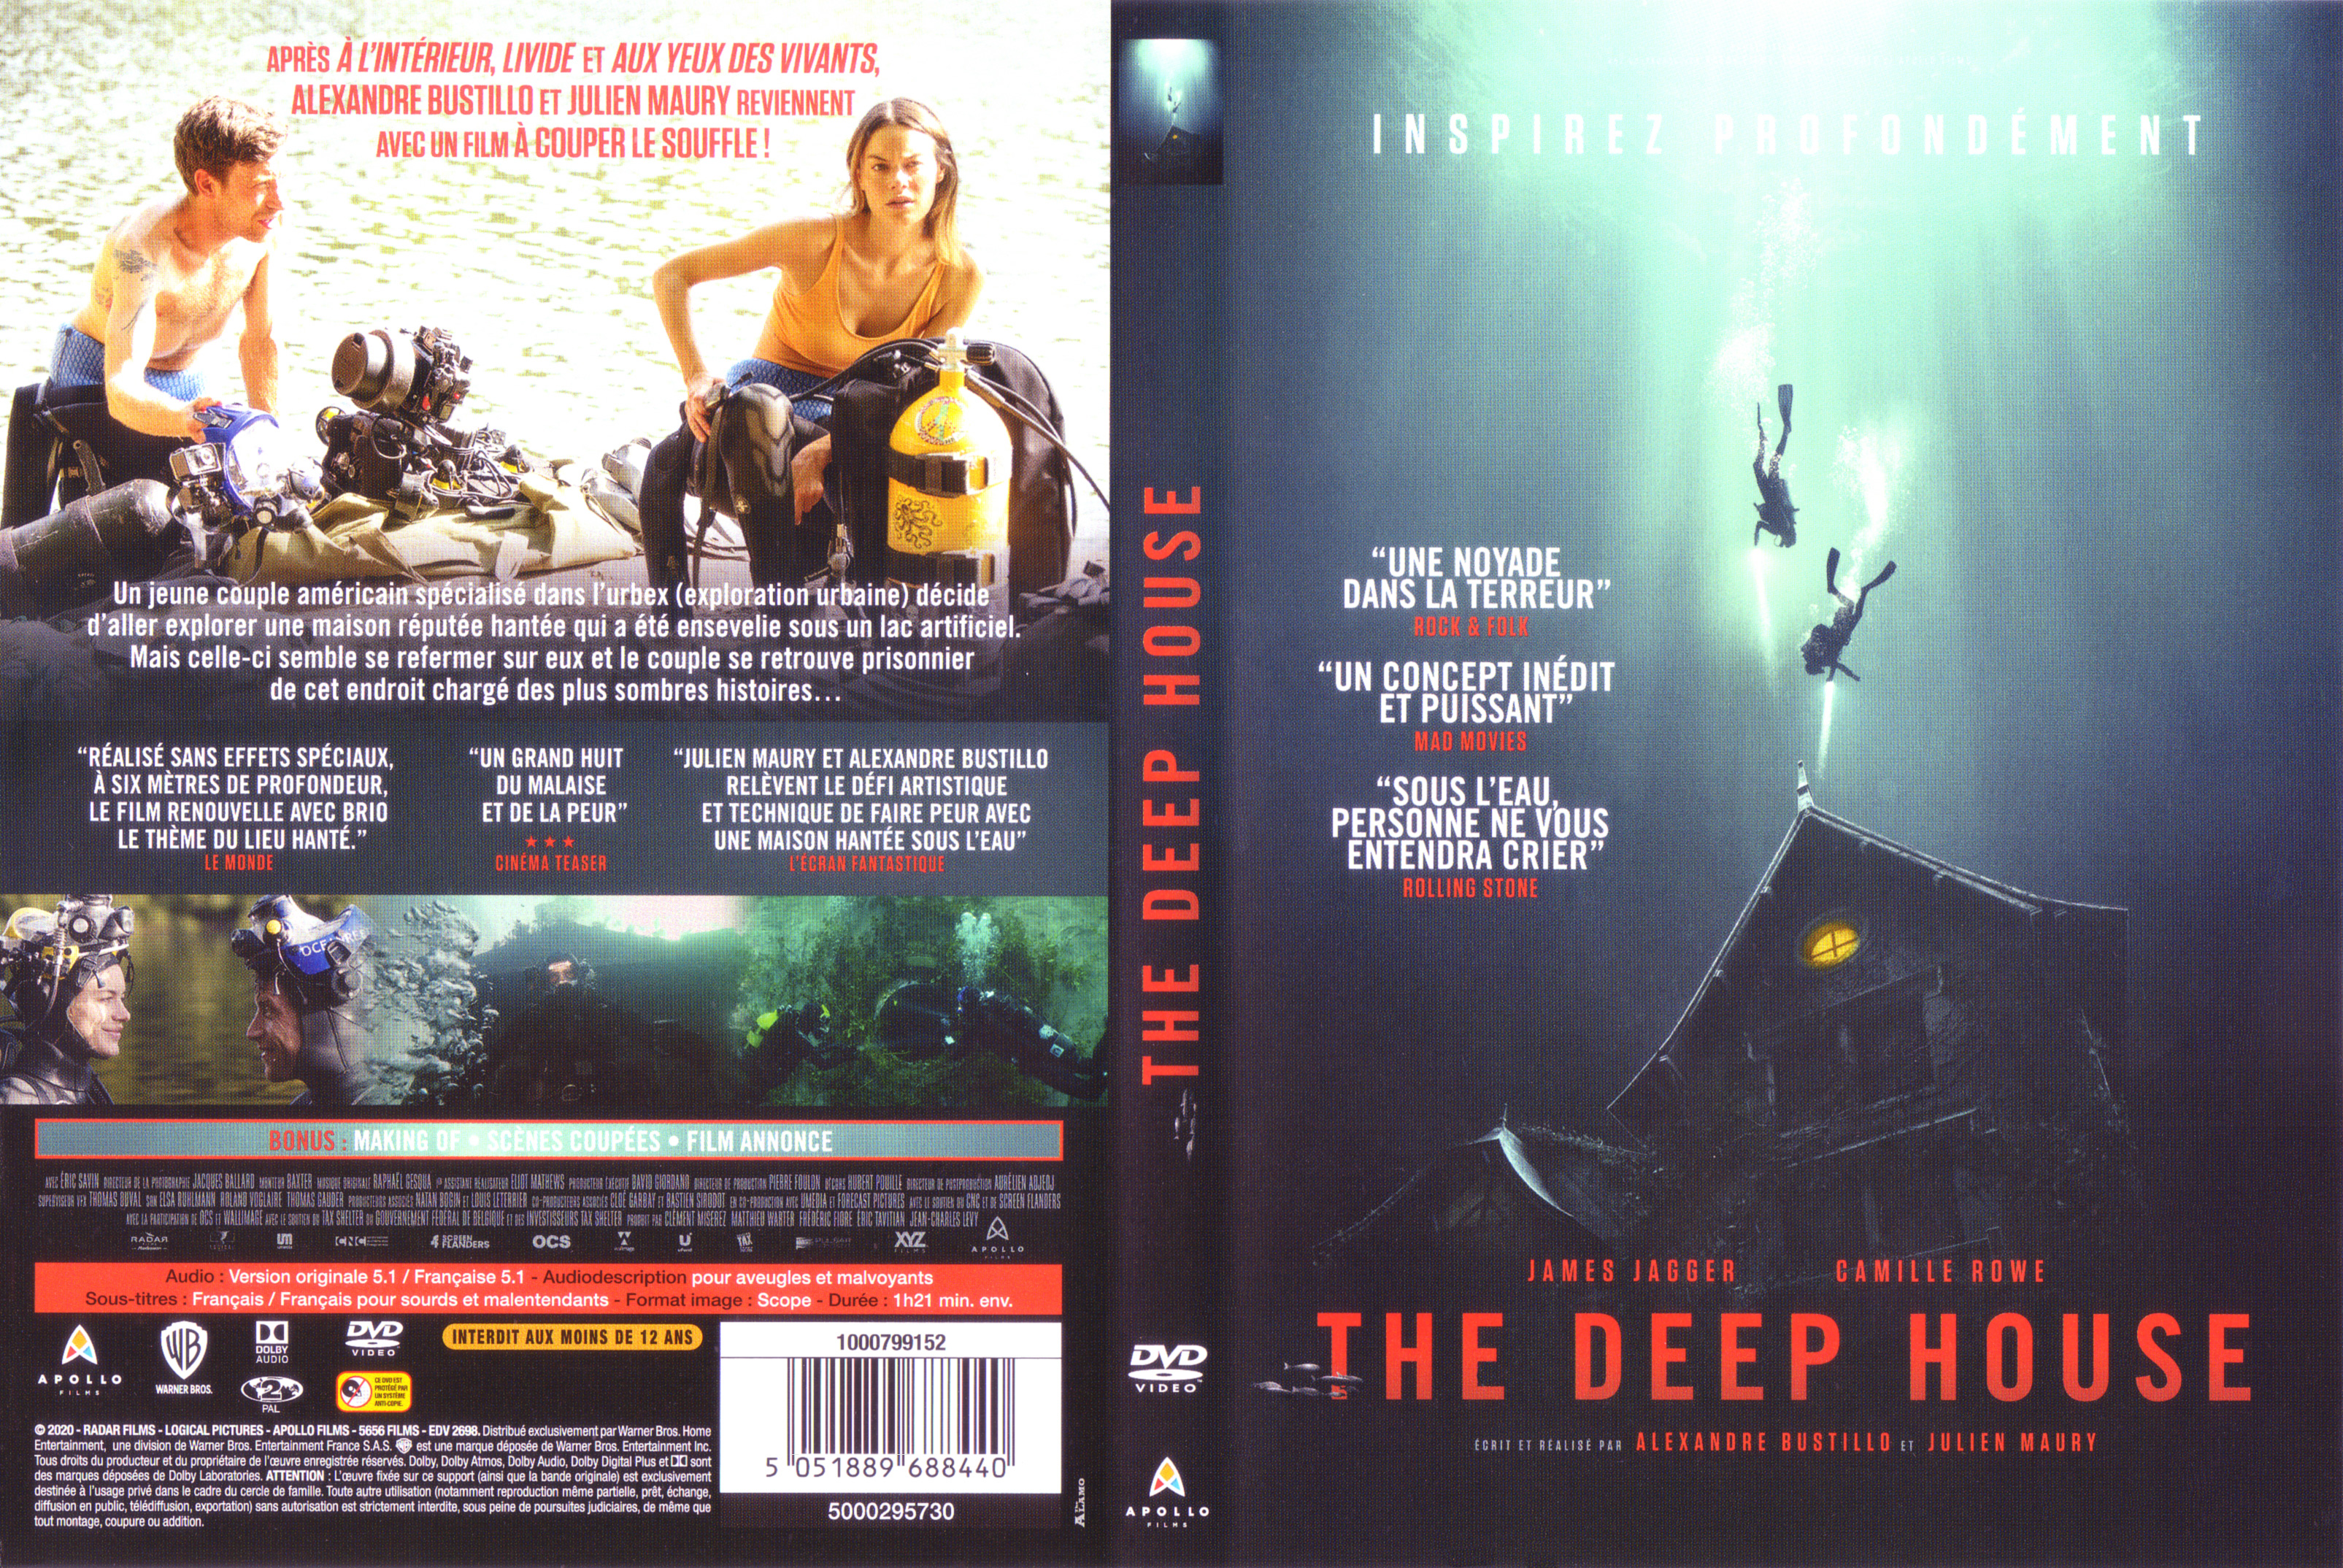 Jaquette DVD The deep house